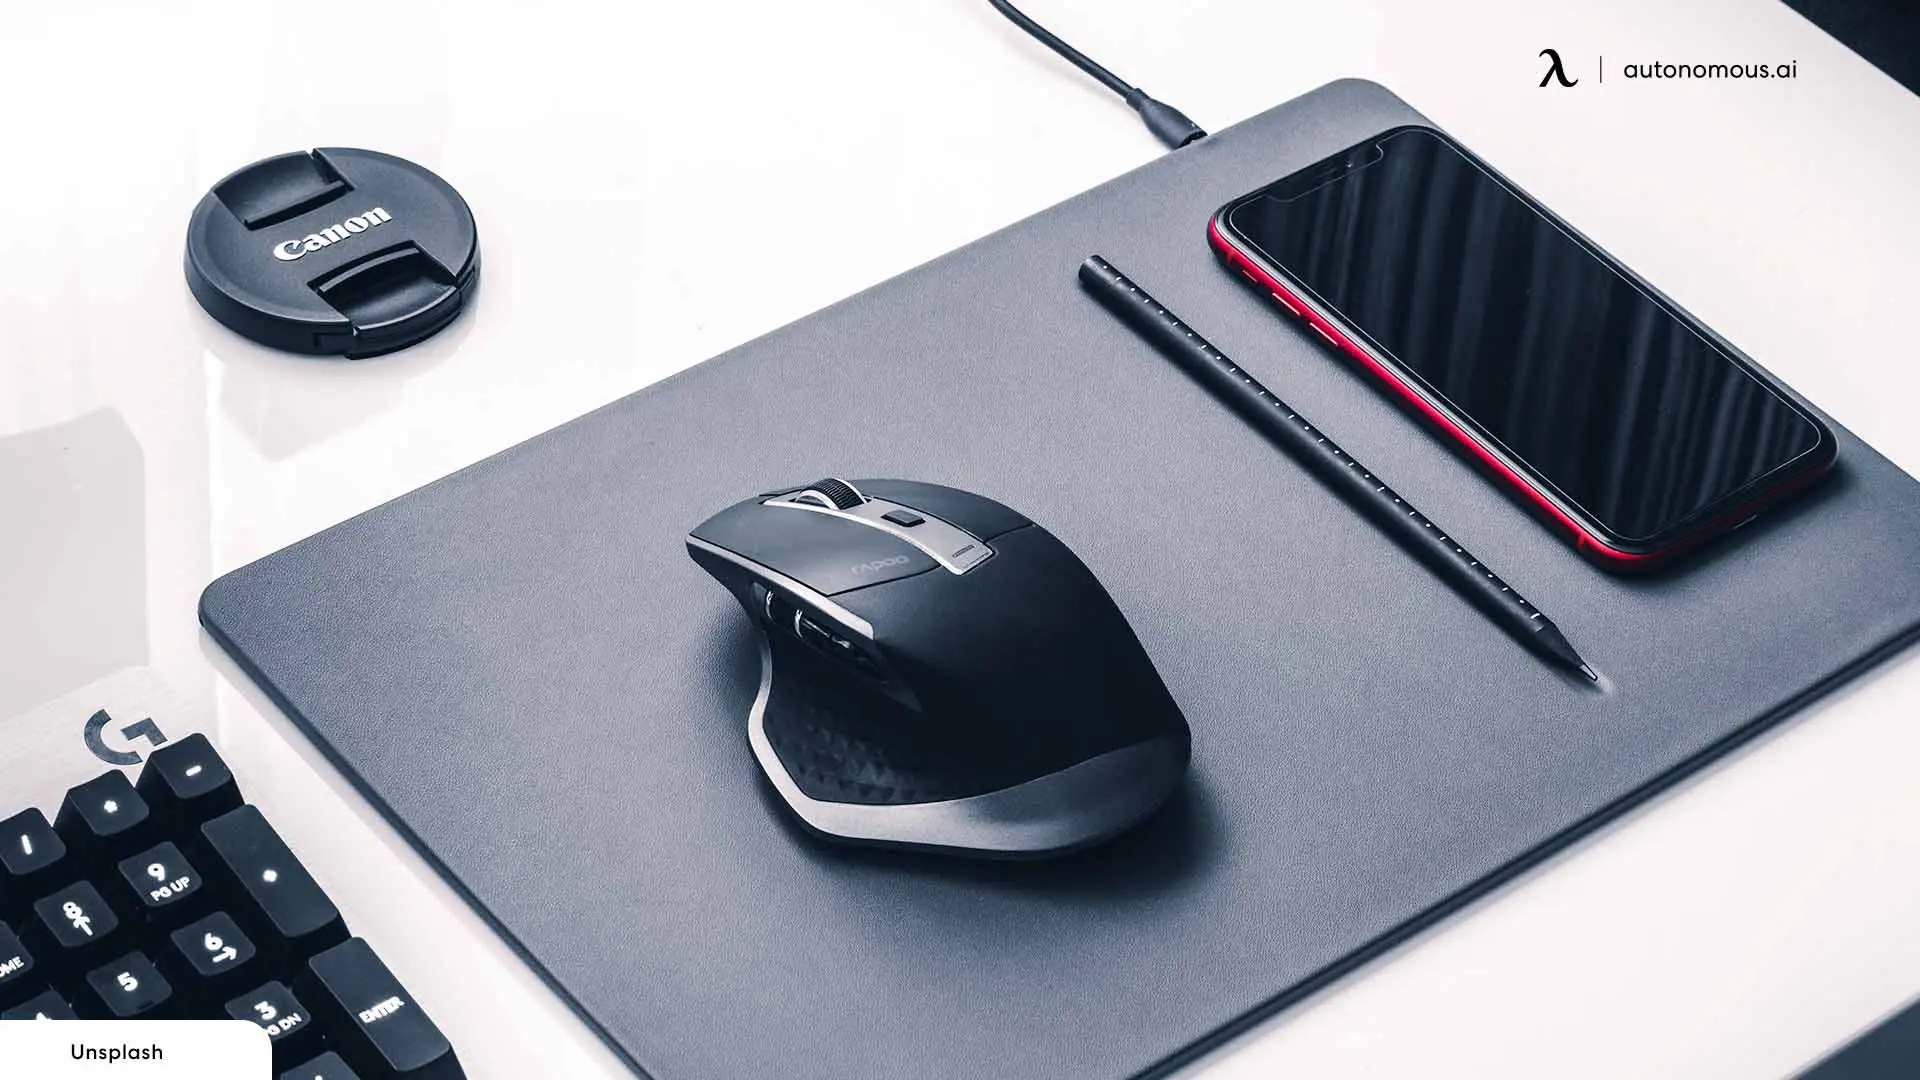 Trackball or Mouse – What Are They Capable of?